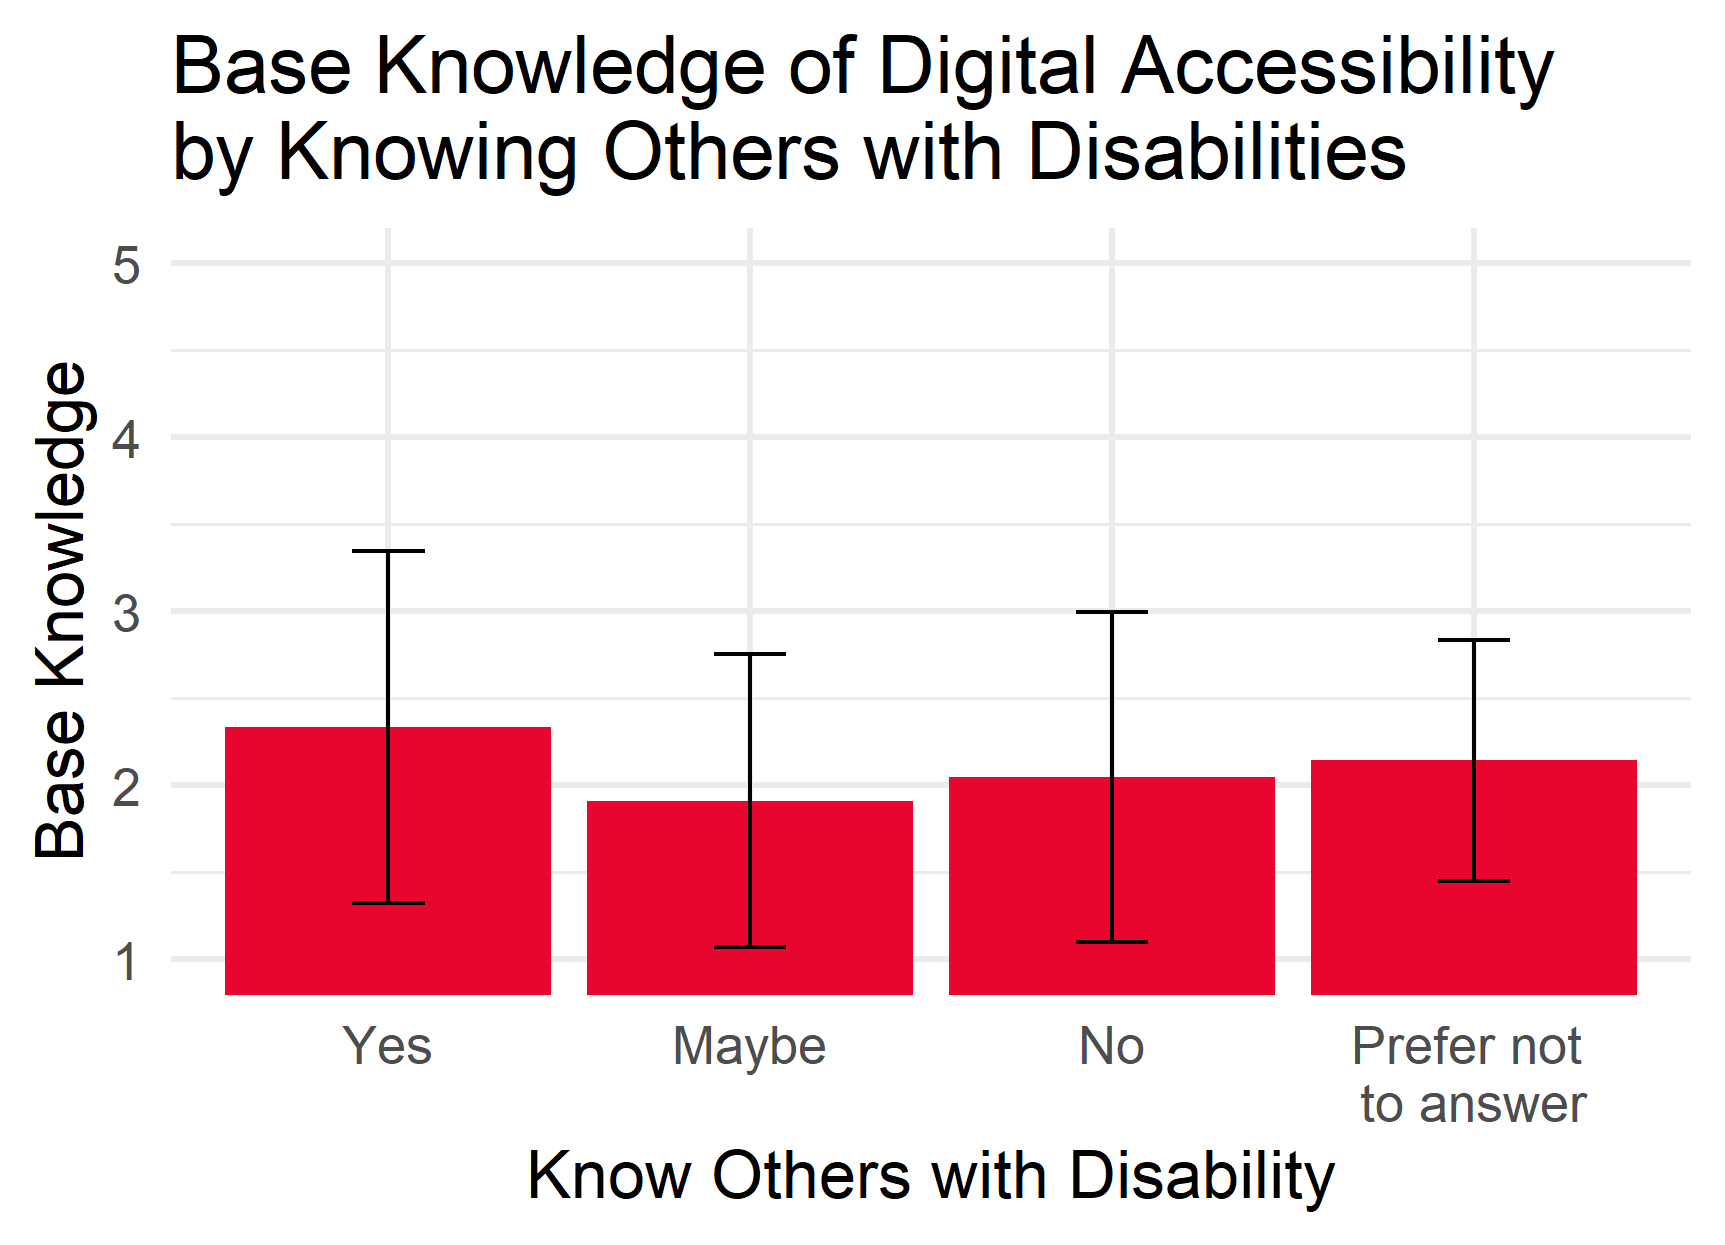 A barplot with error bars Base Knowledge of Digital Accessibility by Disability Status. No significance, but people identifying as knowing another with a disability (M = 2.4; CI = 1.4, 3.4) tend to report knowing the most about digital accessibility, followed by those who prefer not to answer (M = 2.2; CI = 1.5, 2.9). Those who do not know someone tend to claim the next most knowledge about digital accessibility (M = 2.0; CI = 1.2, 3.0) followed by those who answer 